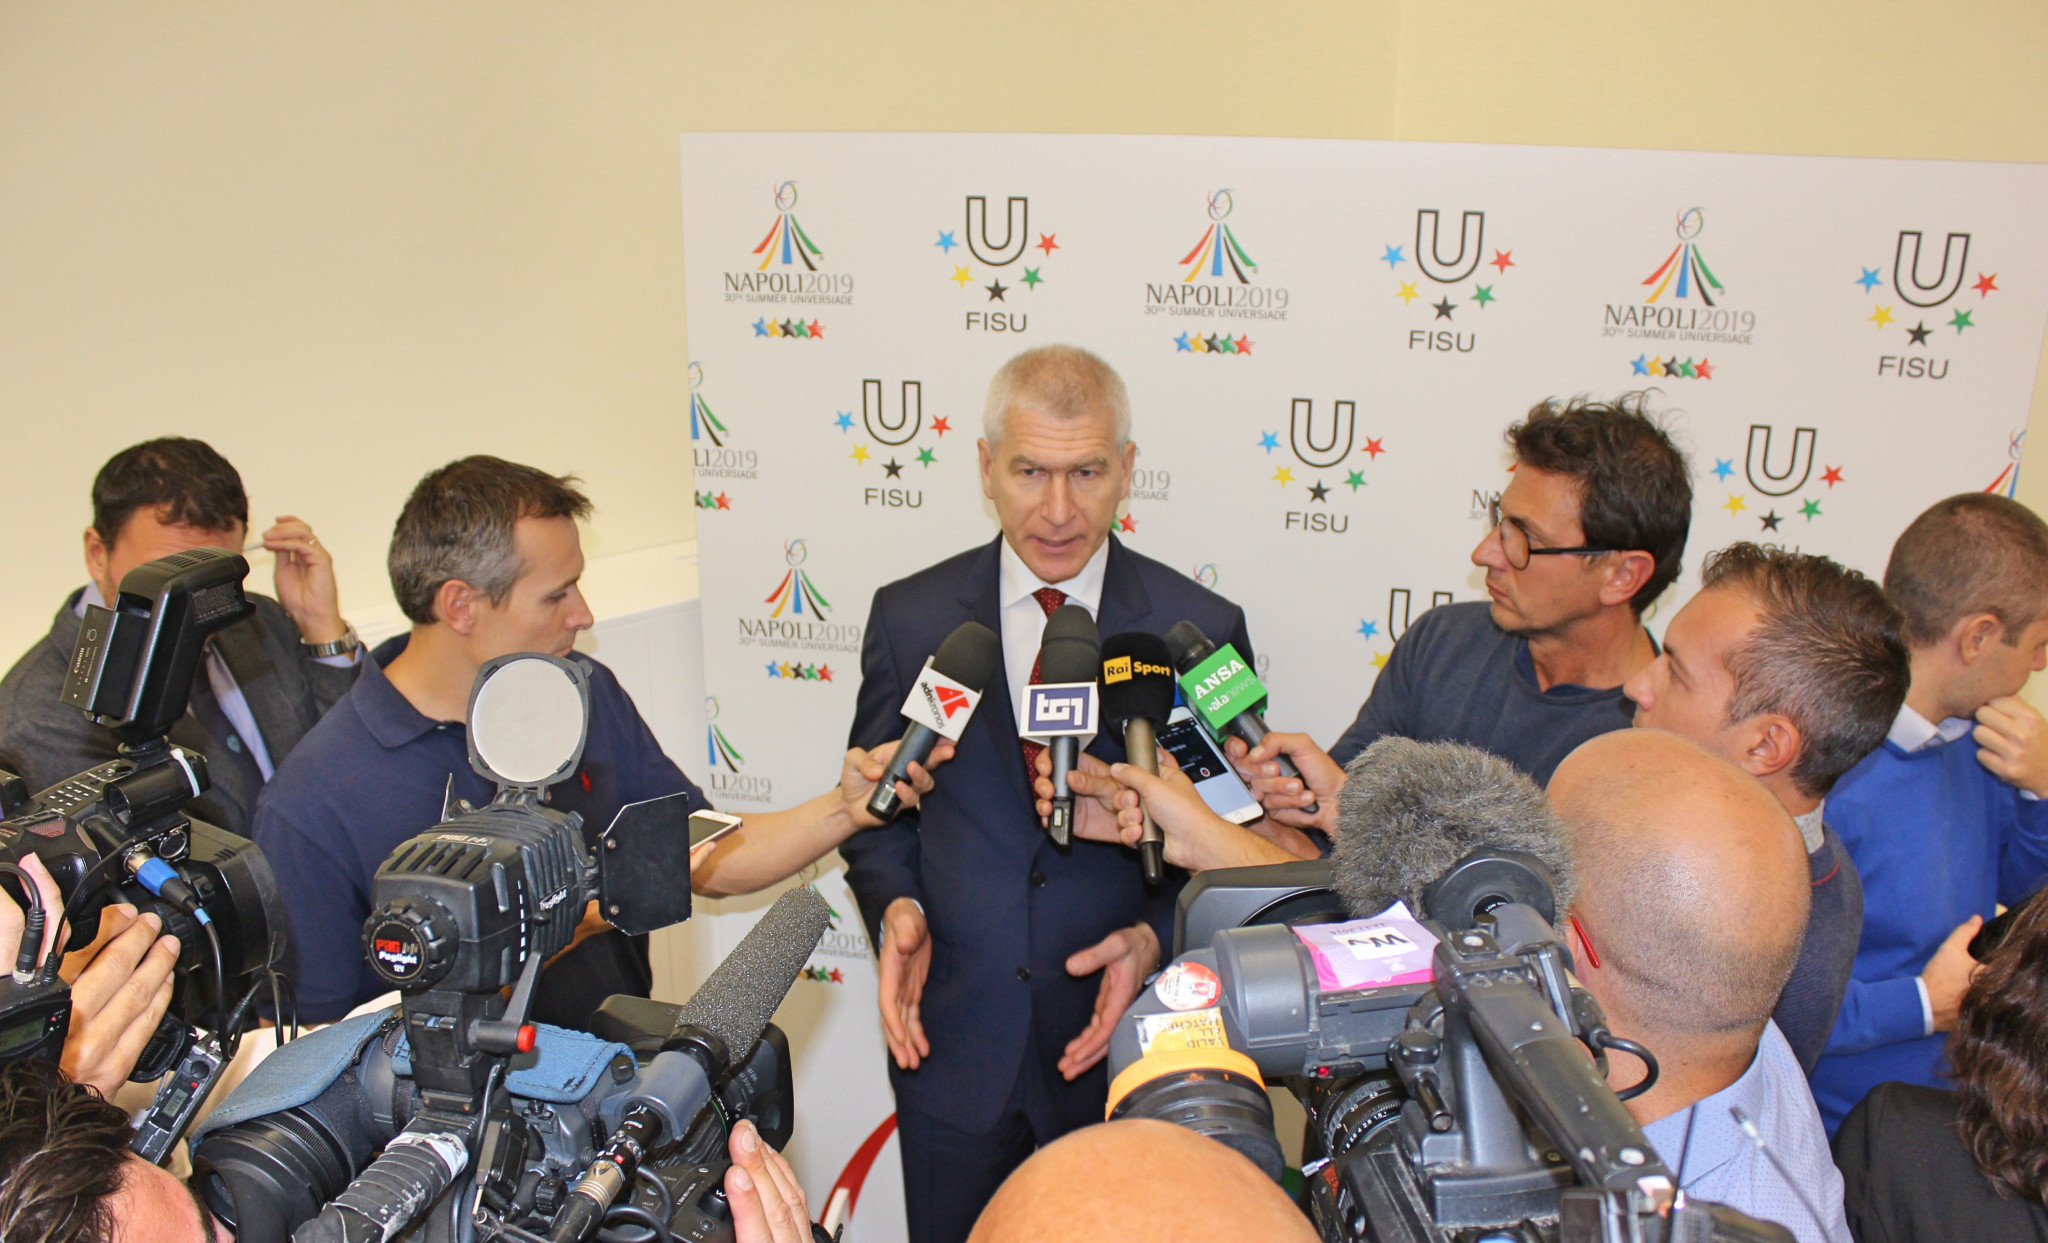 FISU President Oleg Matytsin has called for creative solutions due to the short timeframe in delivering the Universiade ©FISU